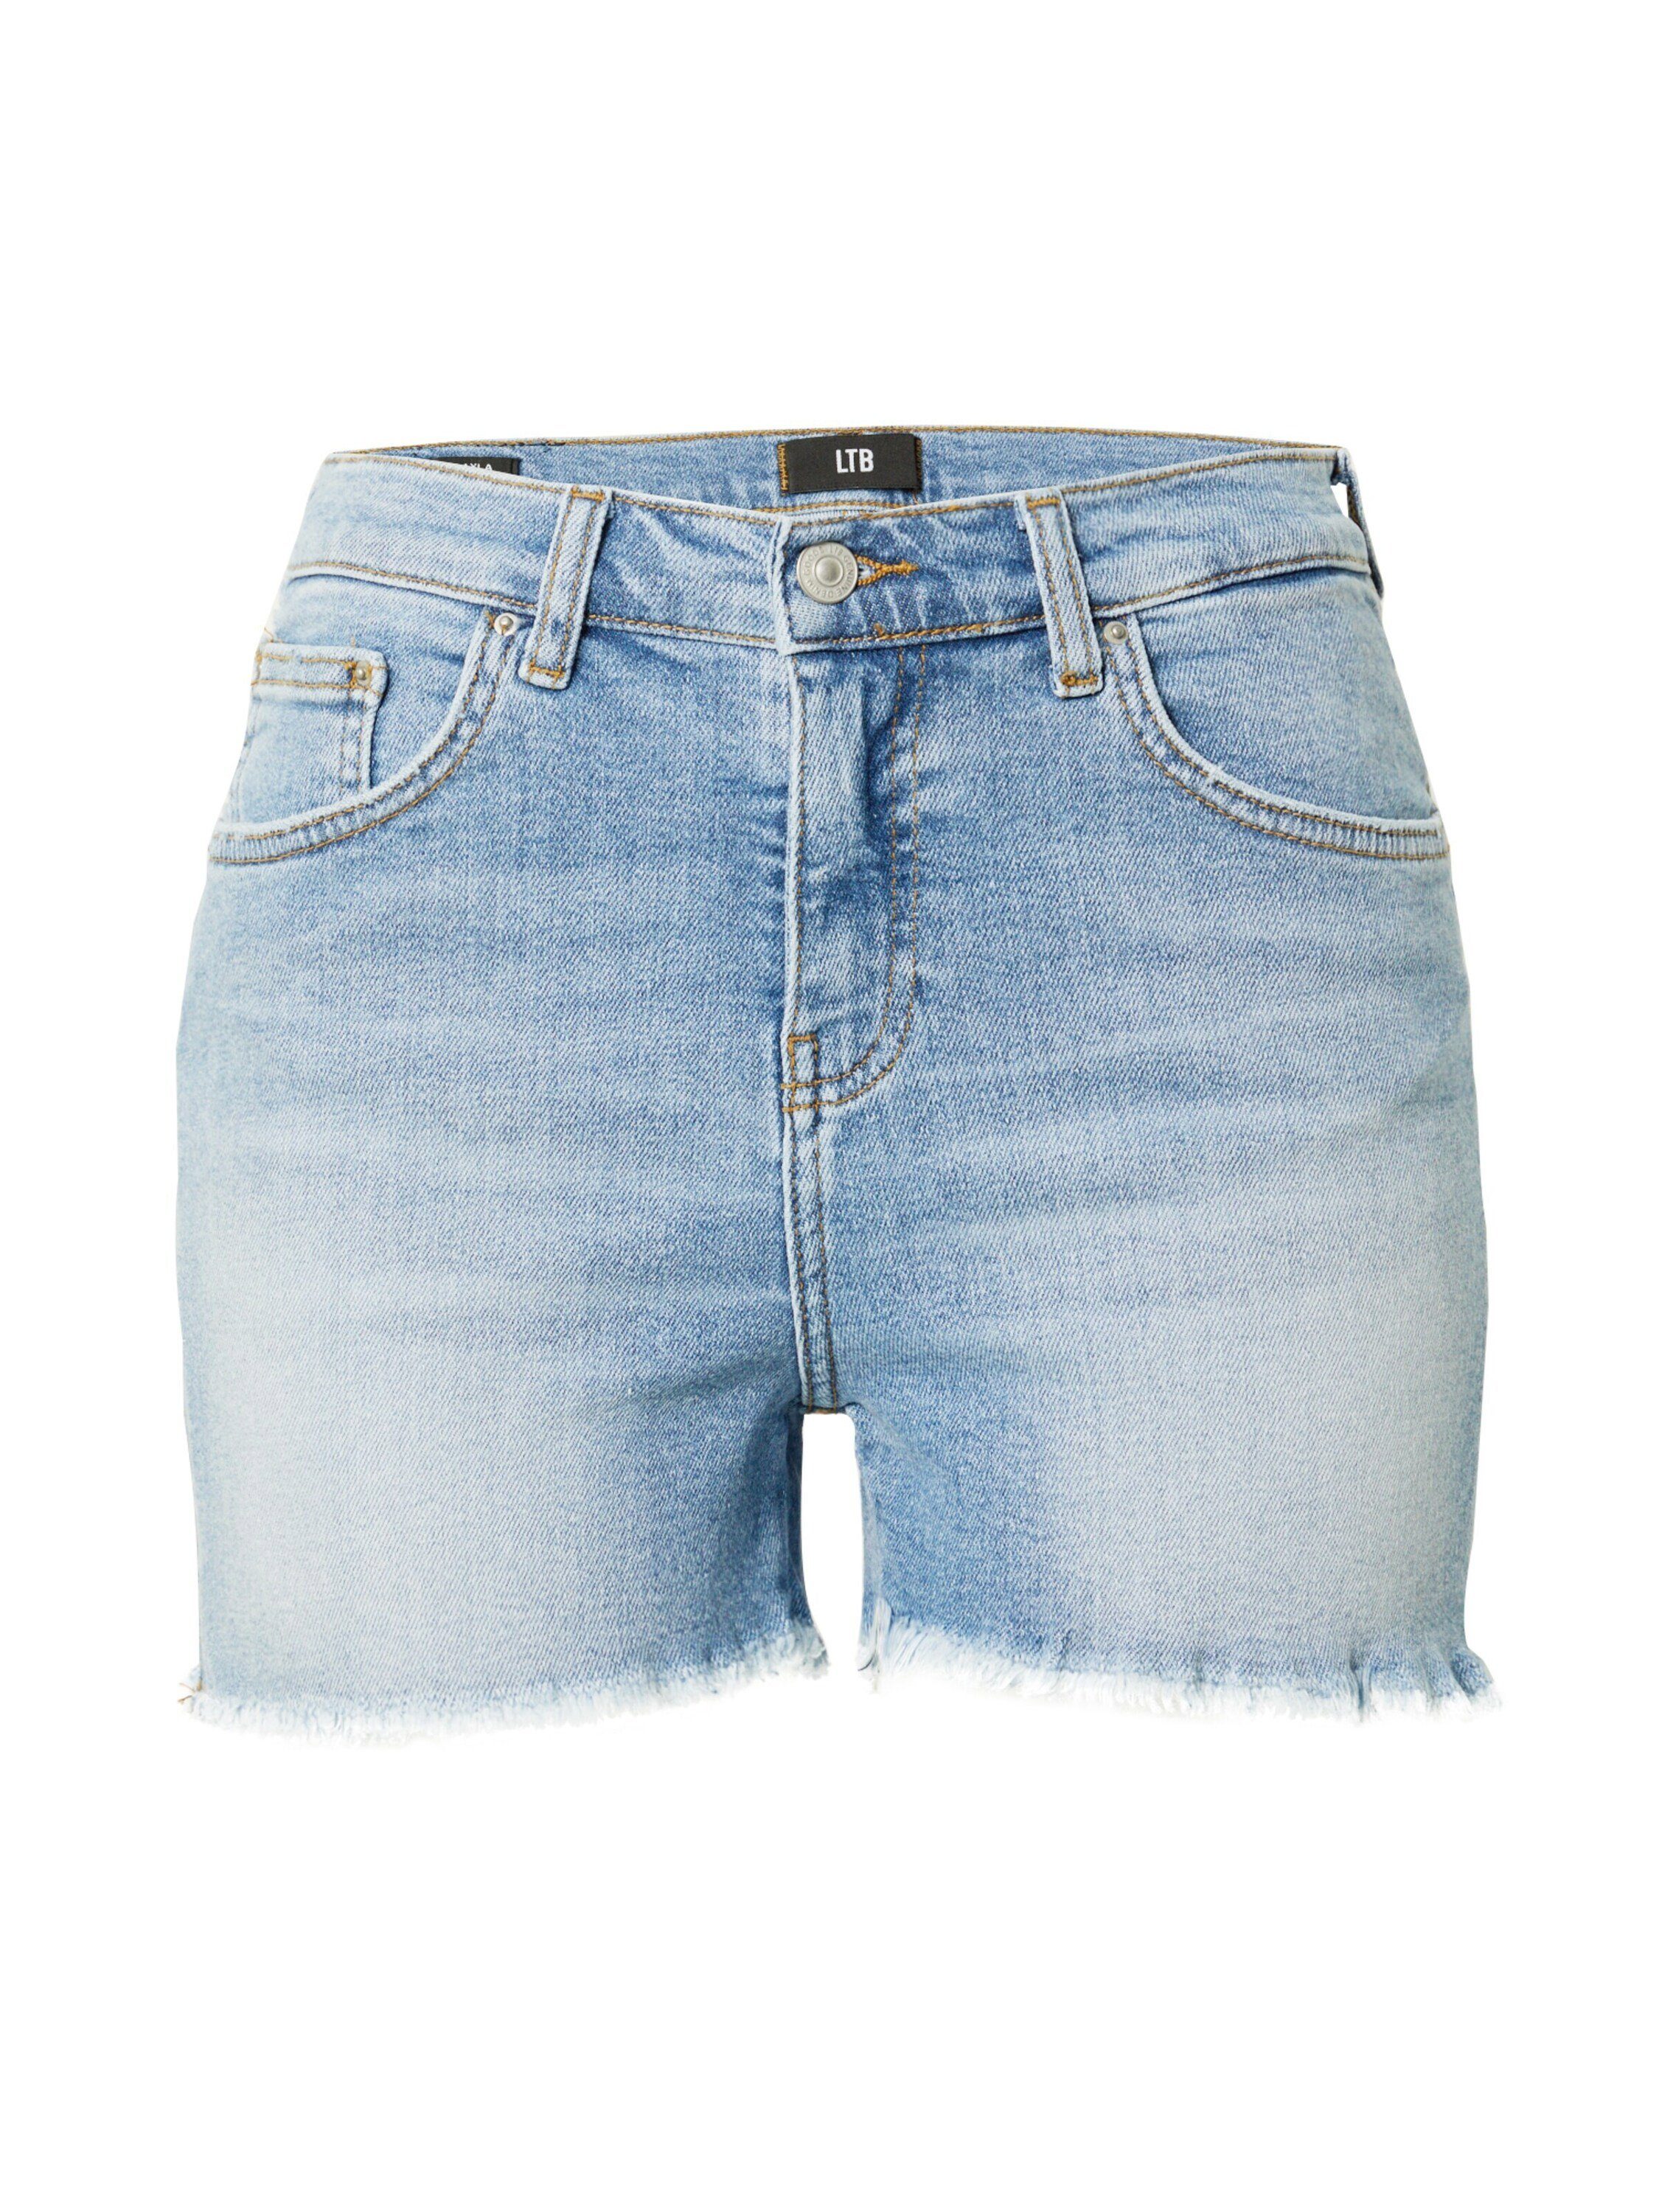 Weiteres LTB LAYLA Patches (1-tlg) Detail, Jeansshorts